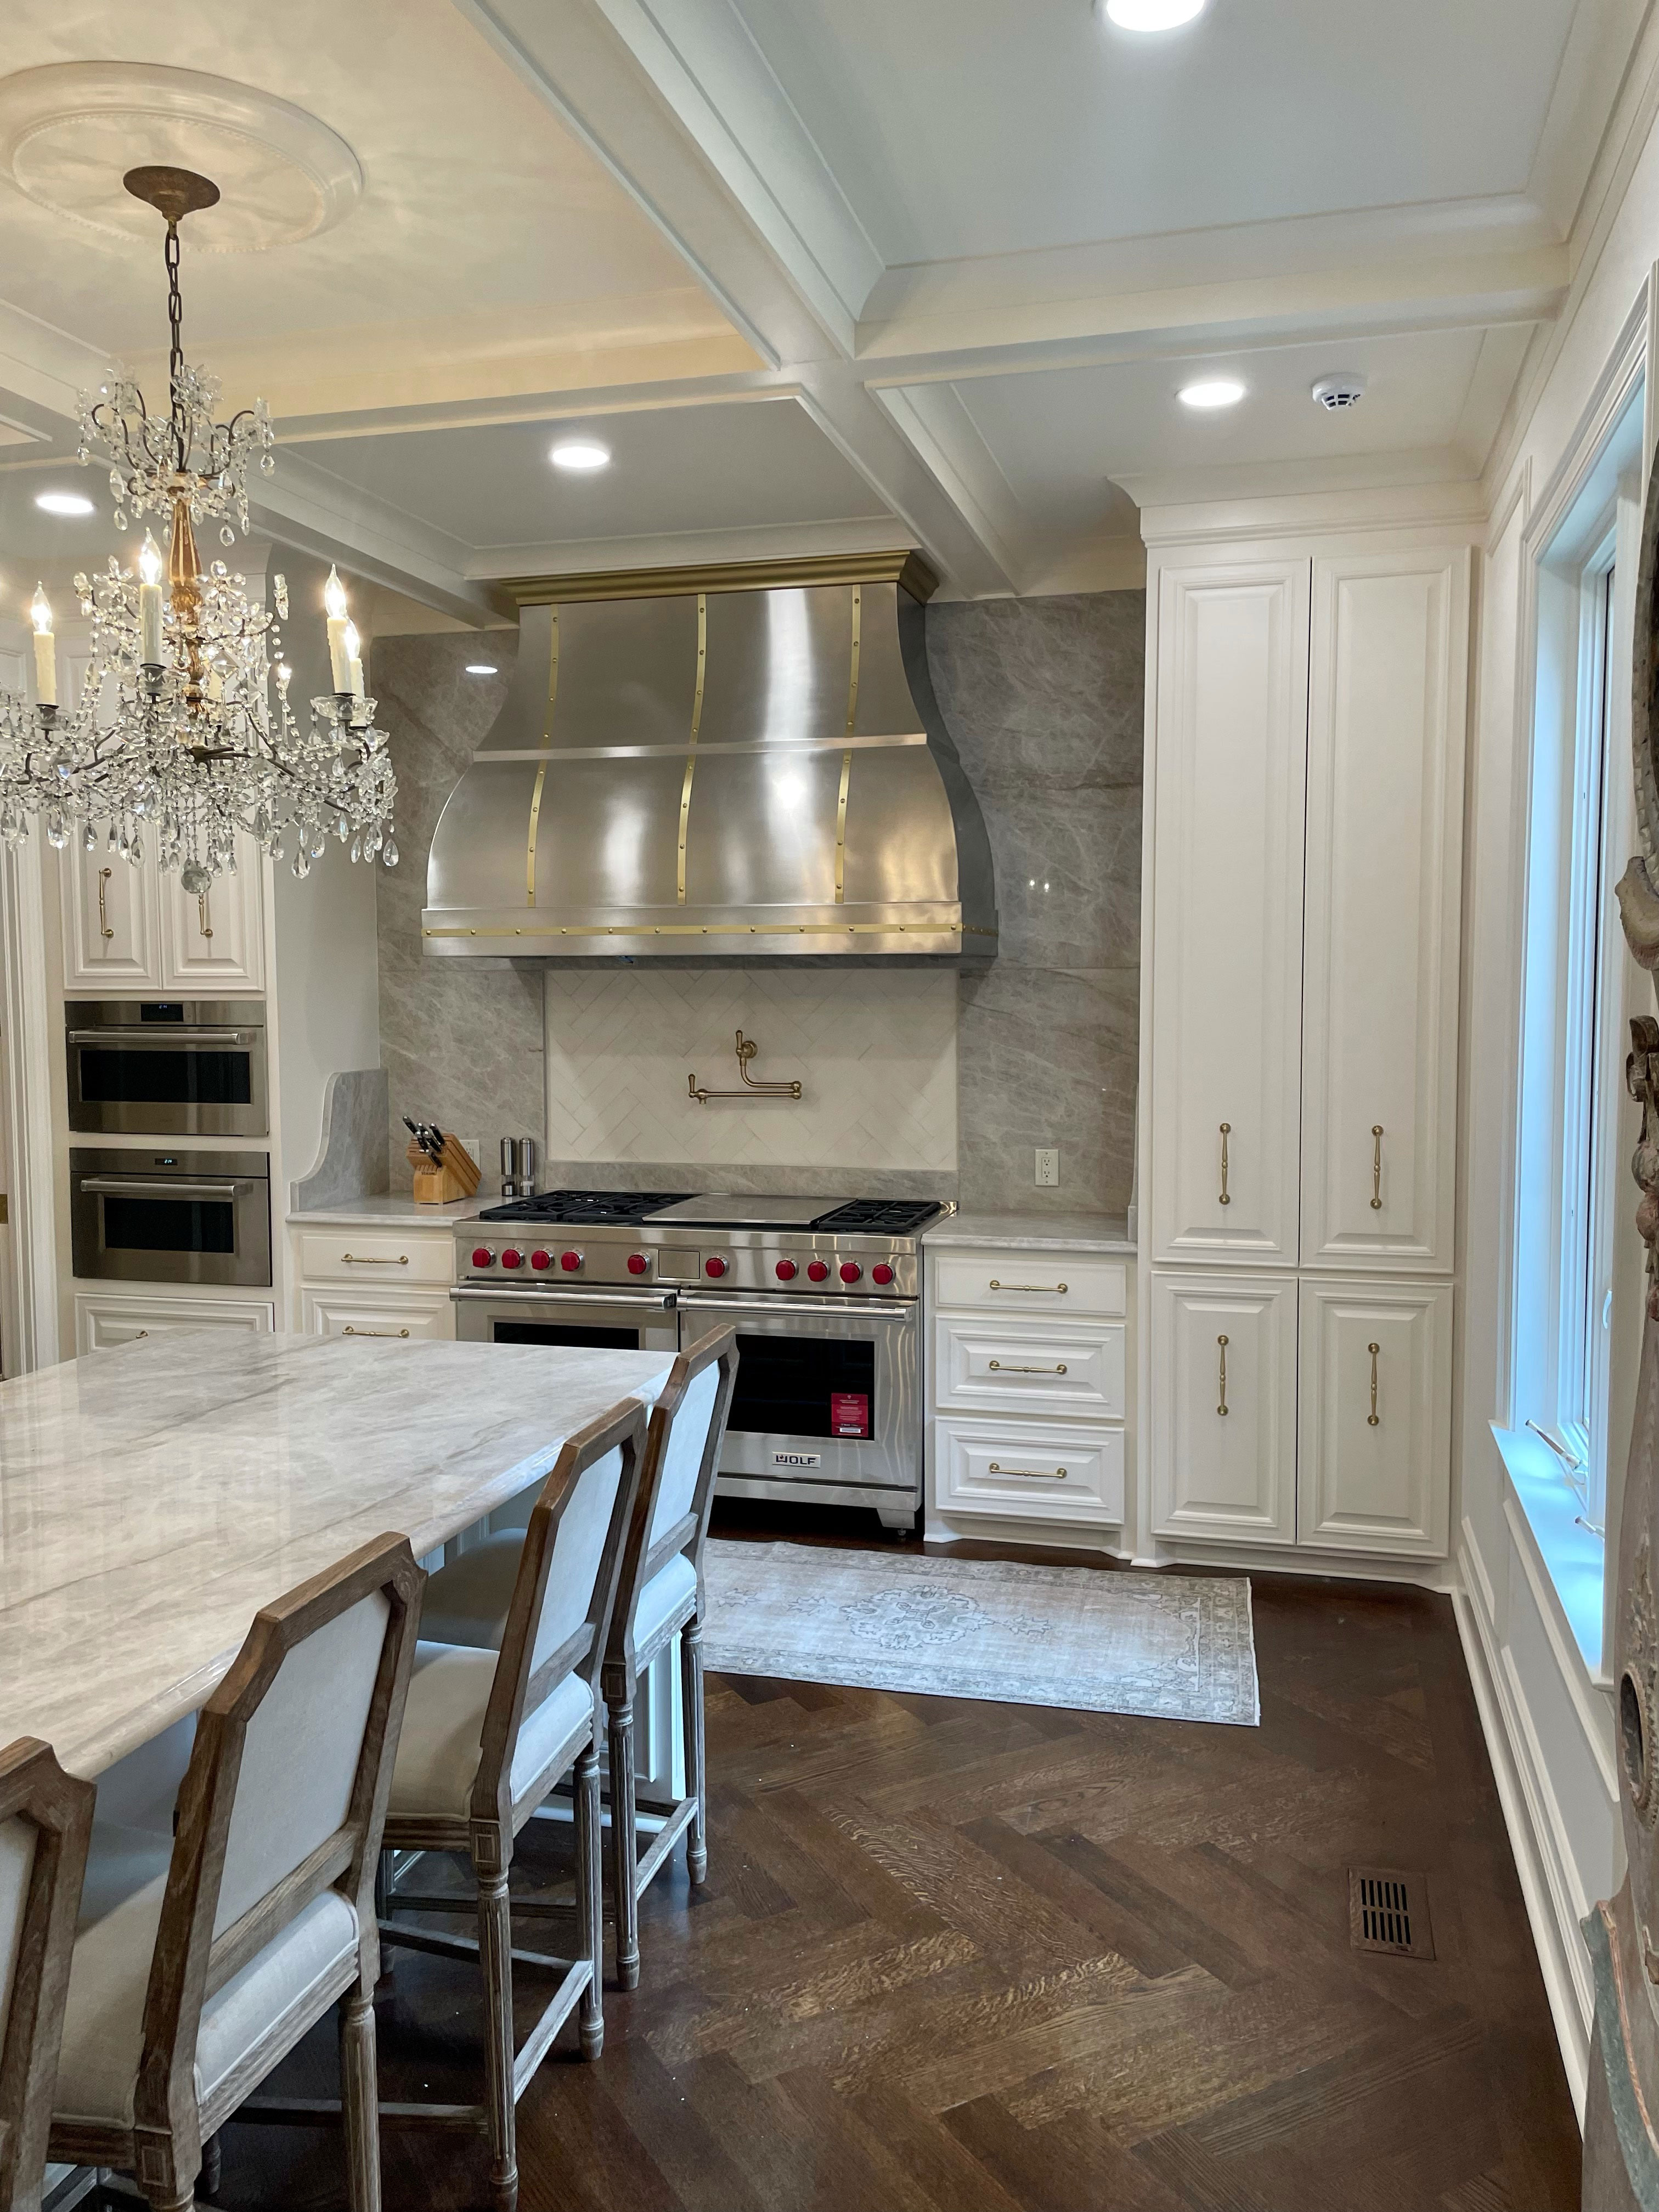 Beautiful kitchen design,incorporating stainless steel range hood with french-inspired kitchen design opting for white kitchen cabinets